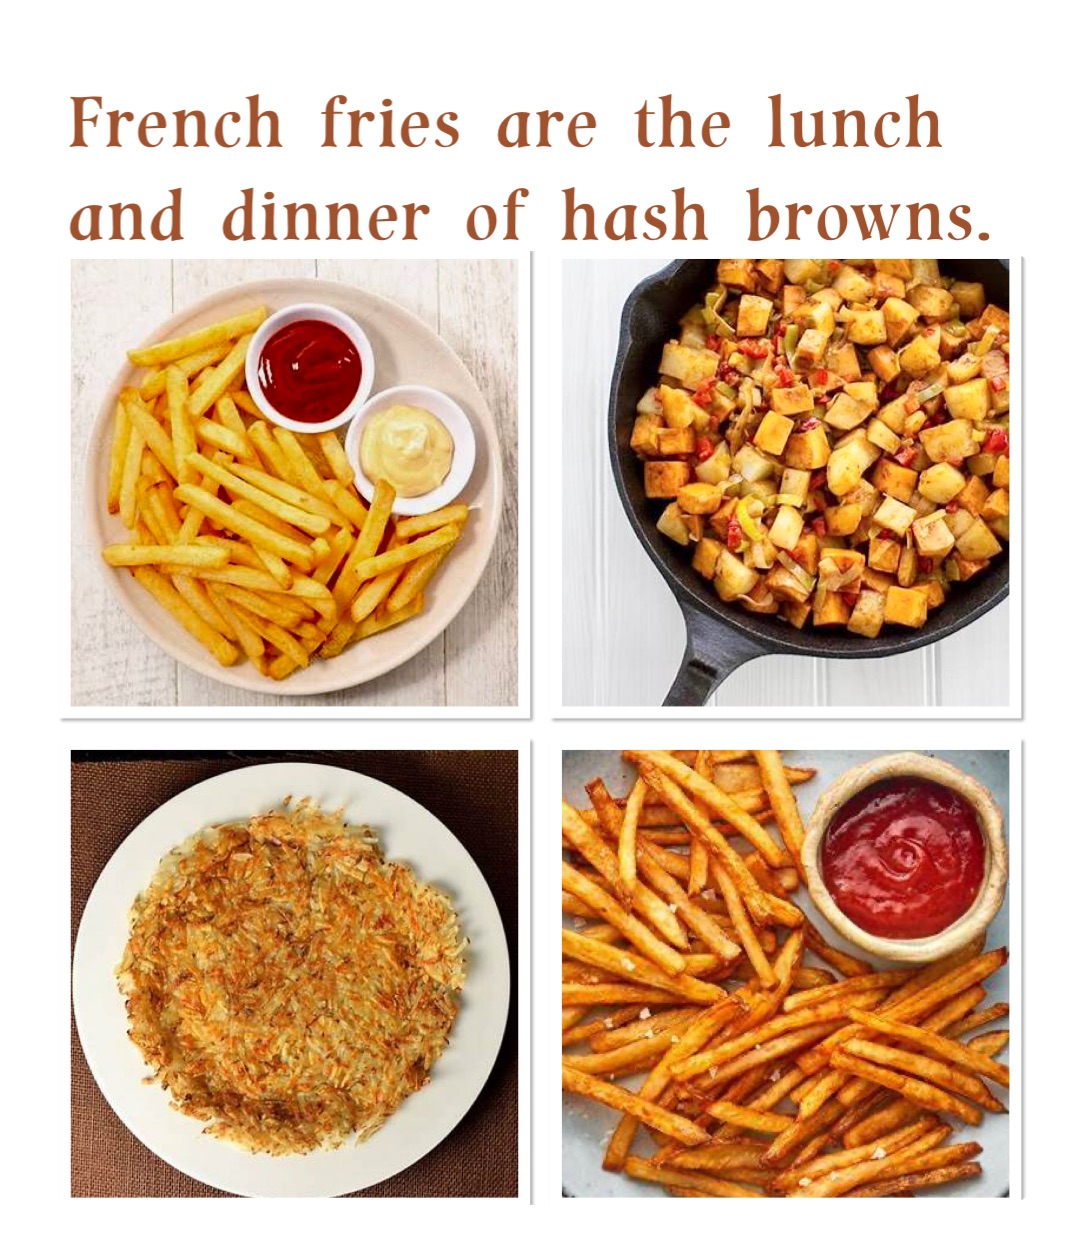 French fries are the lunch and dinner of hash browns.